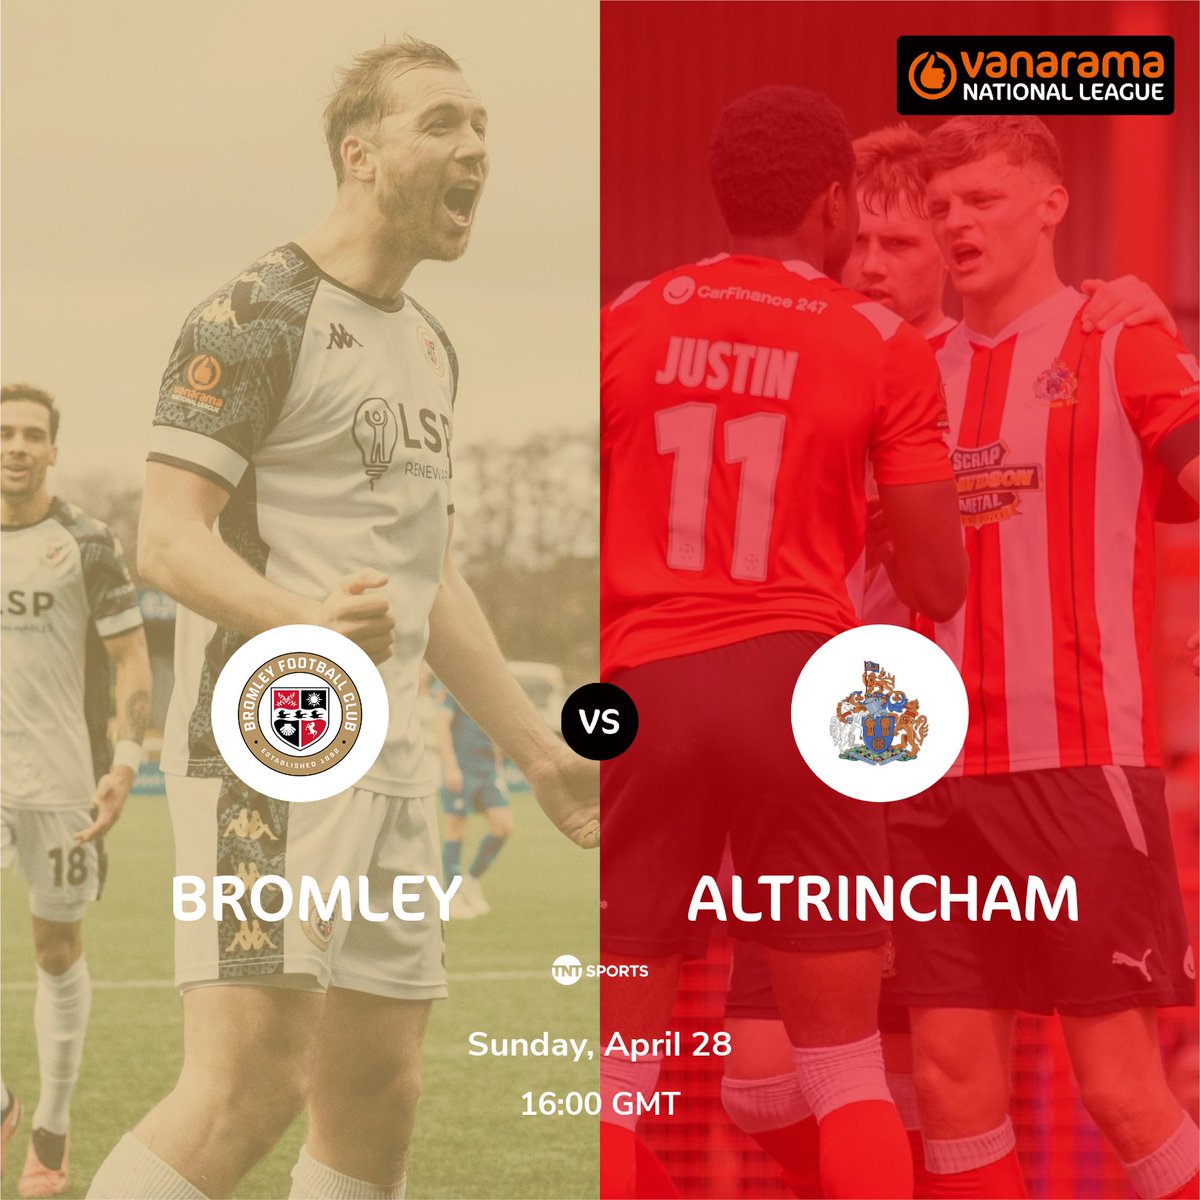 Not long until we find out our second National League Promotion Finalist, live on @tntsports 🎥 Who have you got: @bromleyfc or @altrinchamfc? 📸 @MartinGreig2, @altymoore1 #TheVanarama | @TheVanaramaNL